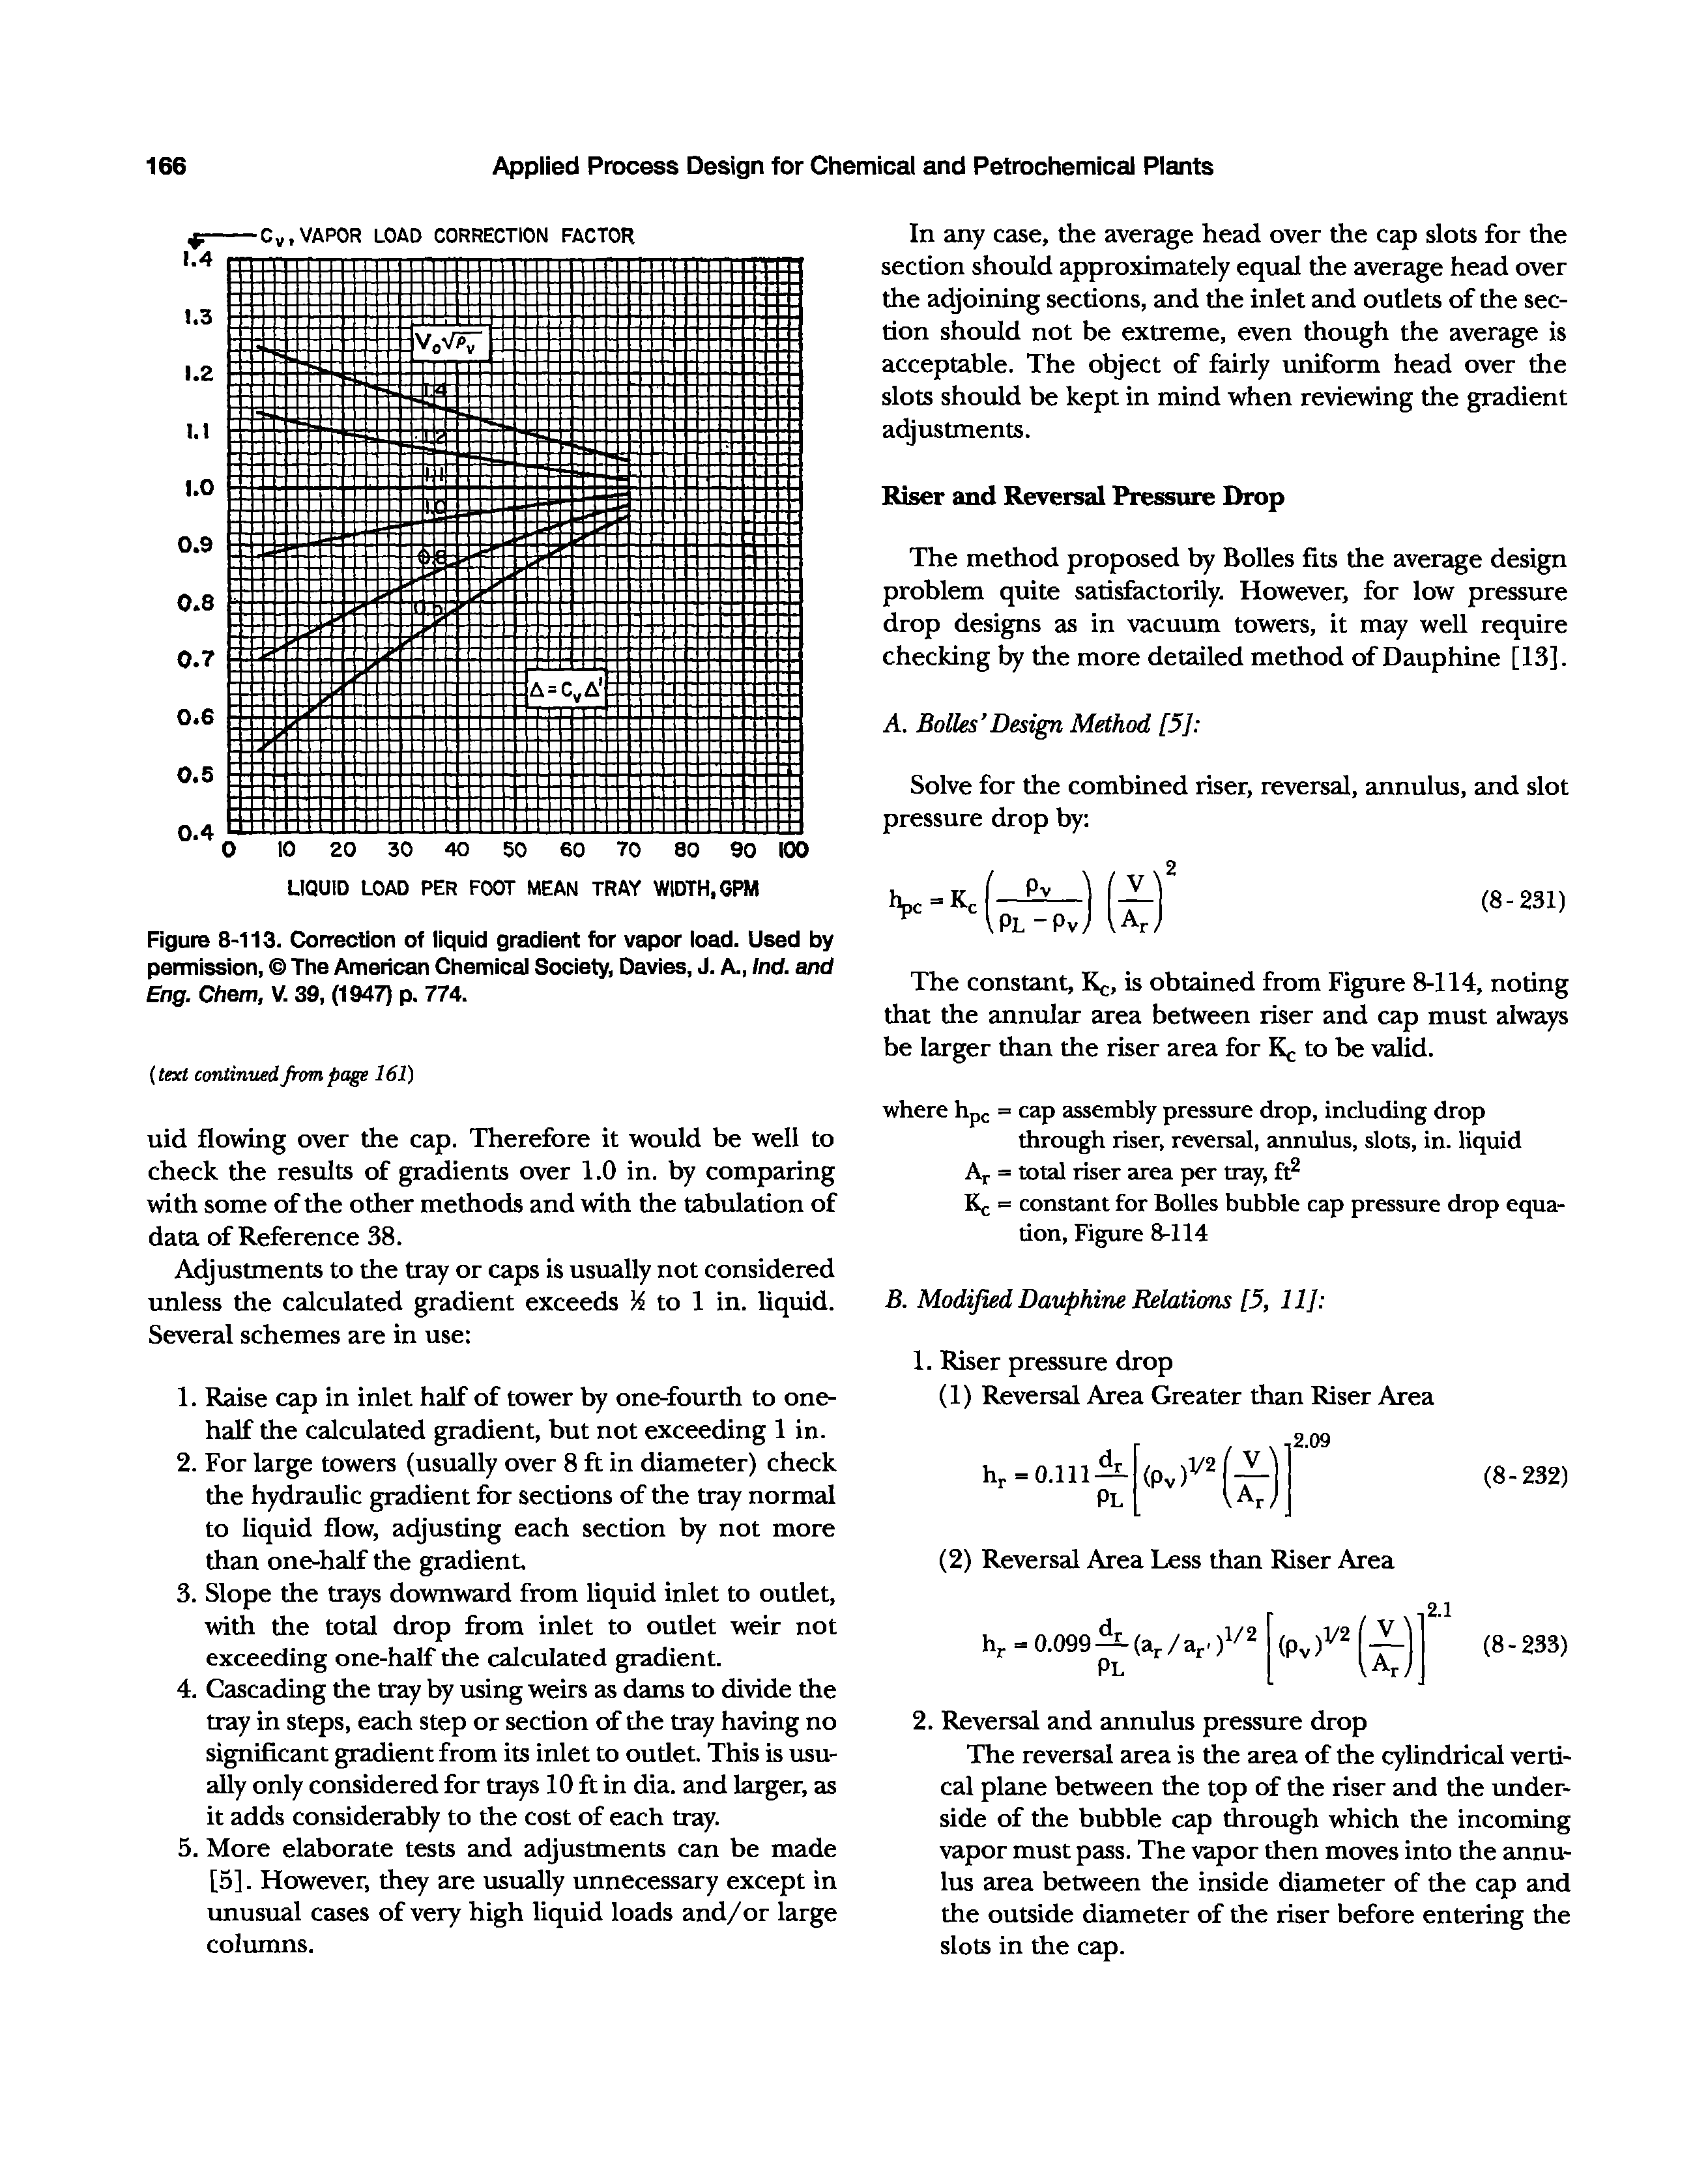 Figure 8-113. Correction of liquid gradient for vapor load. Used by permission, The American Chemical Society, Davies, J. A., Ind. and Eng. Cham, V. 39, (1947) p. 774.